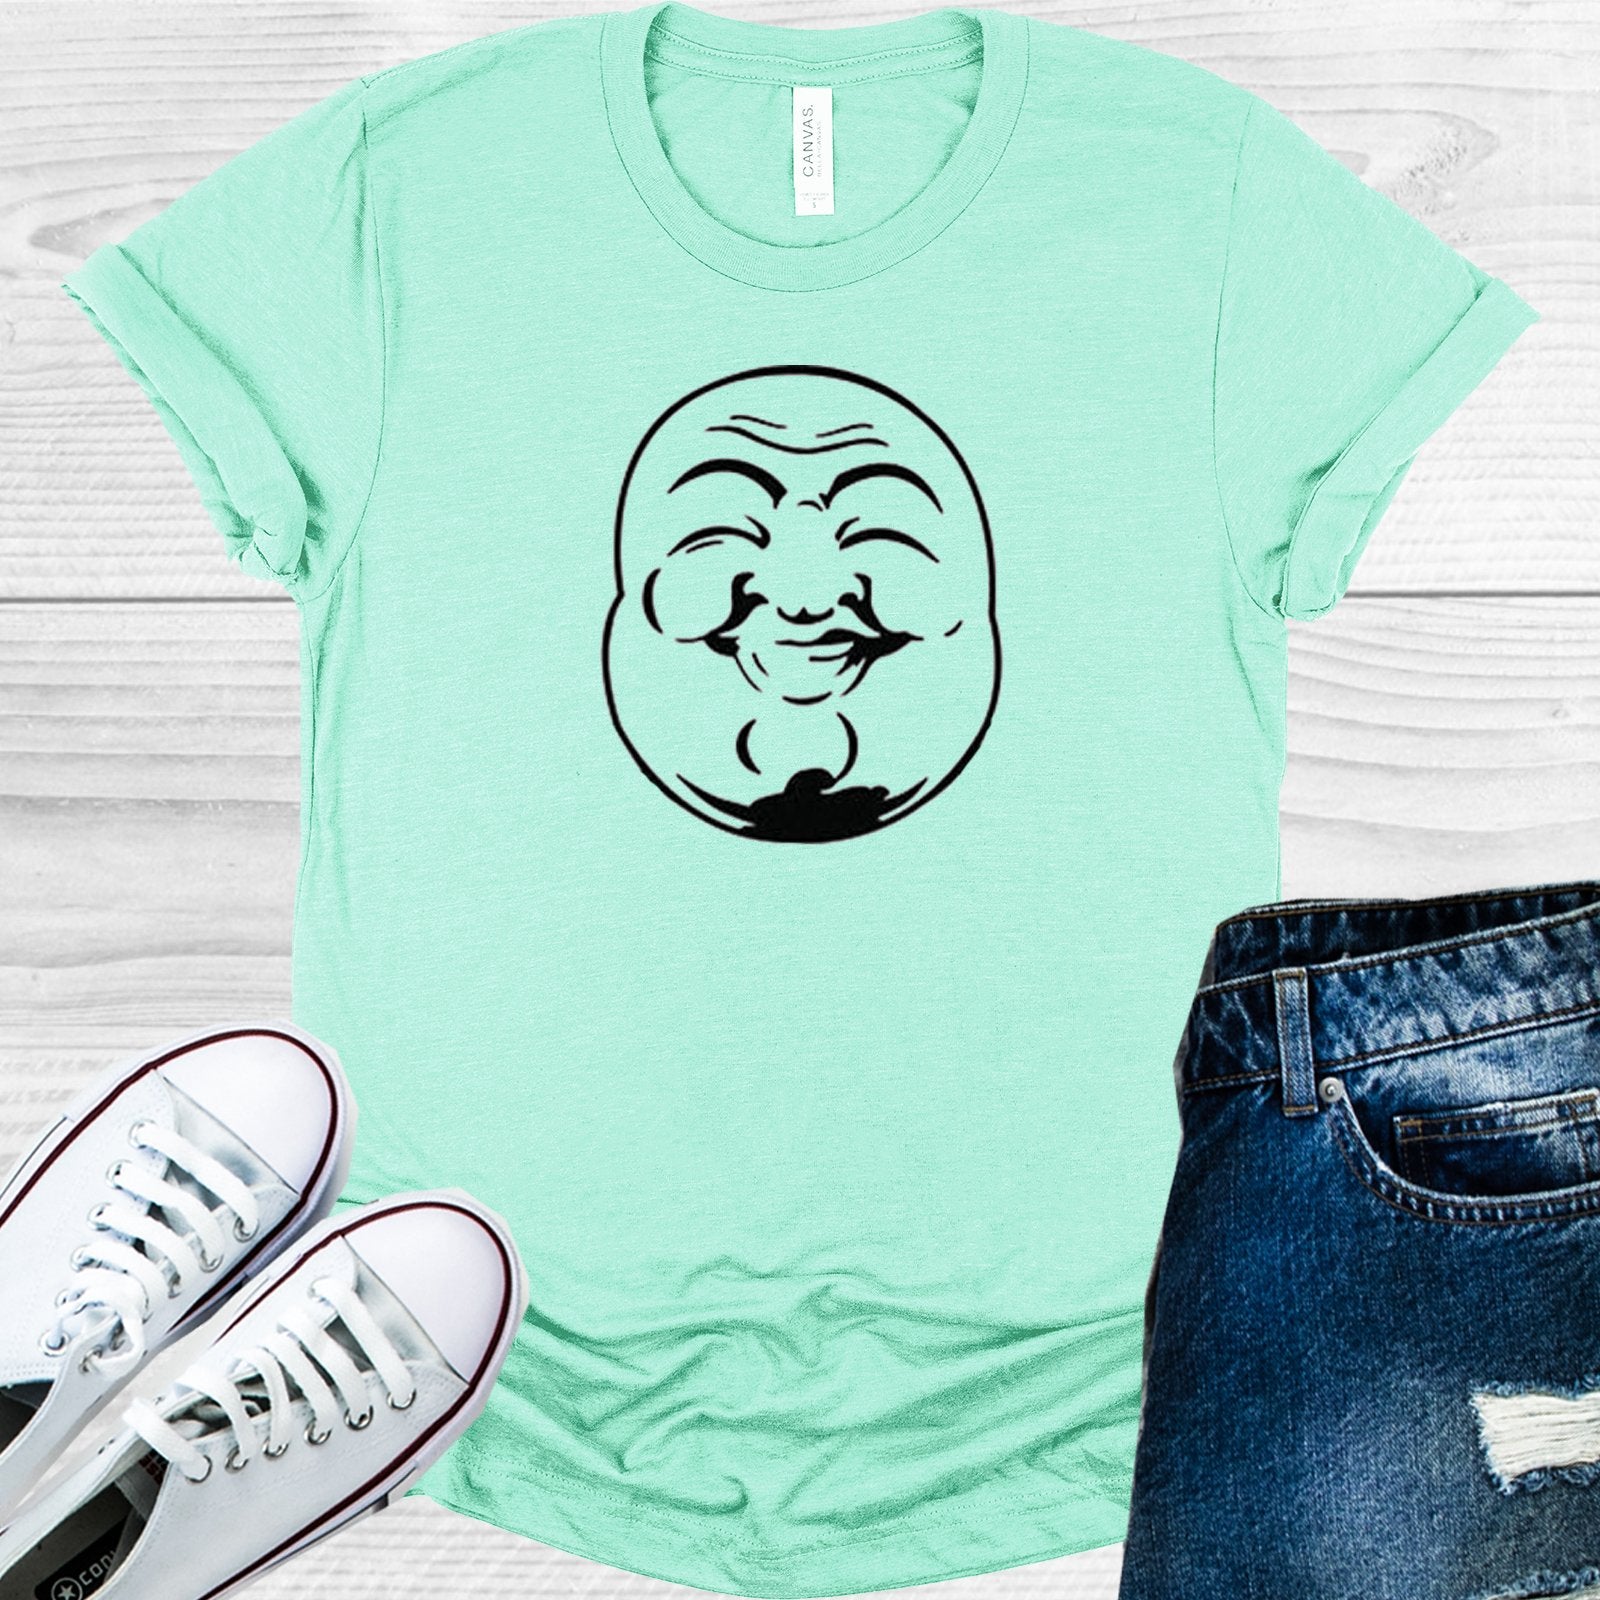 Buddah Face Graphic Tee Graphic Tee